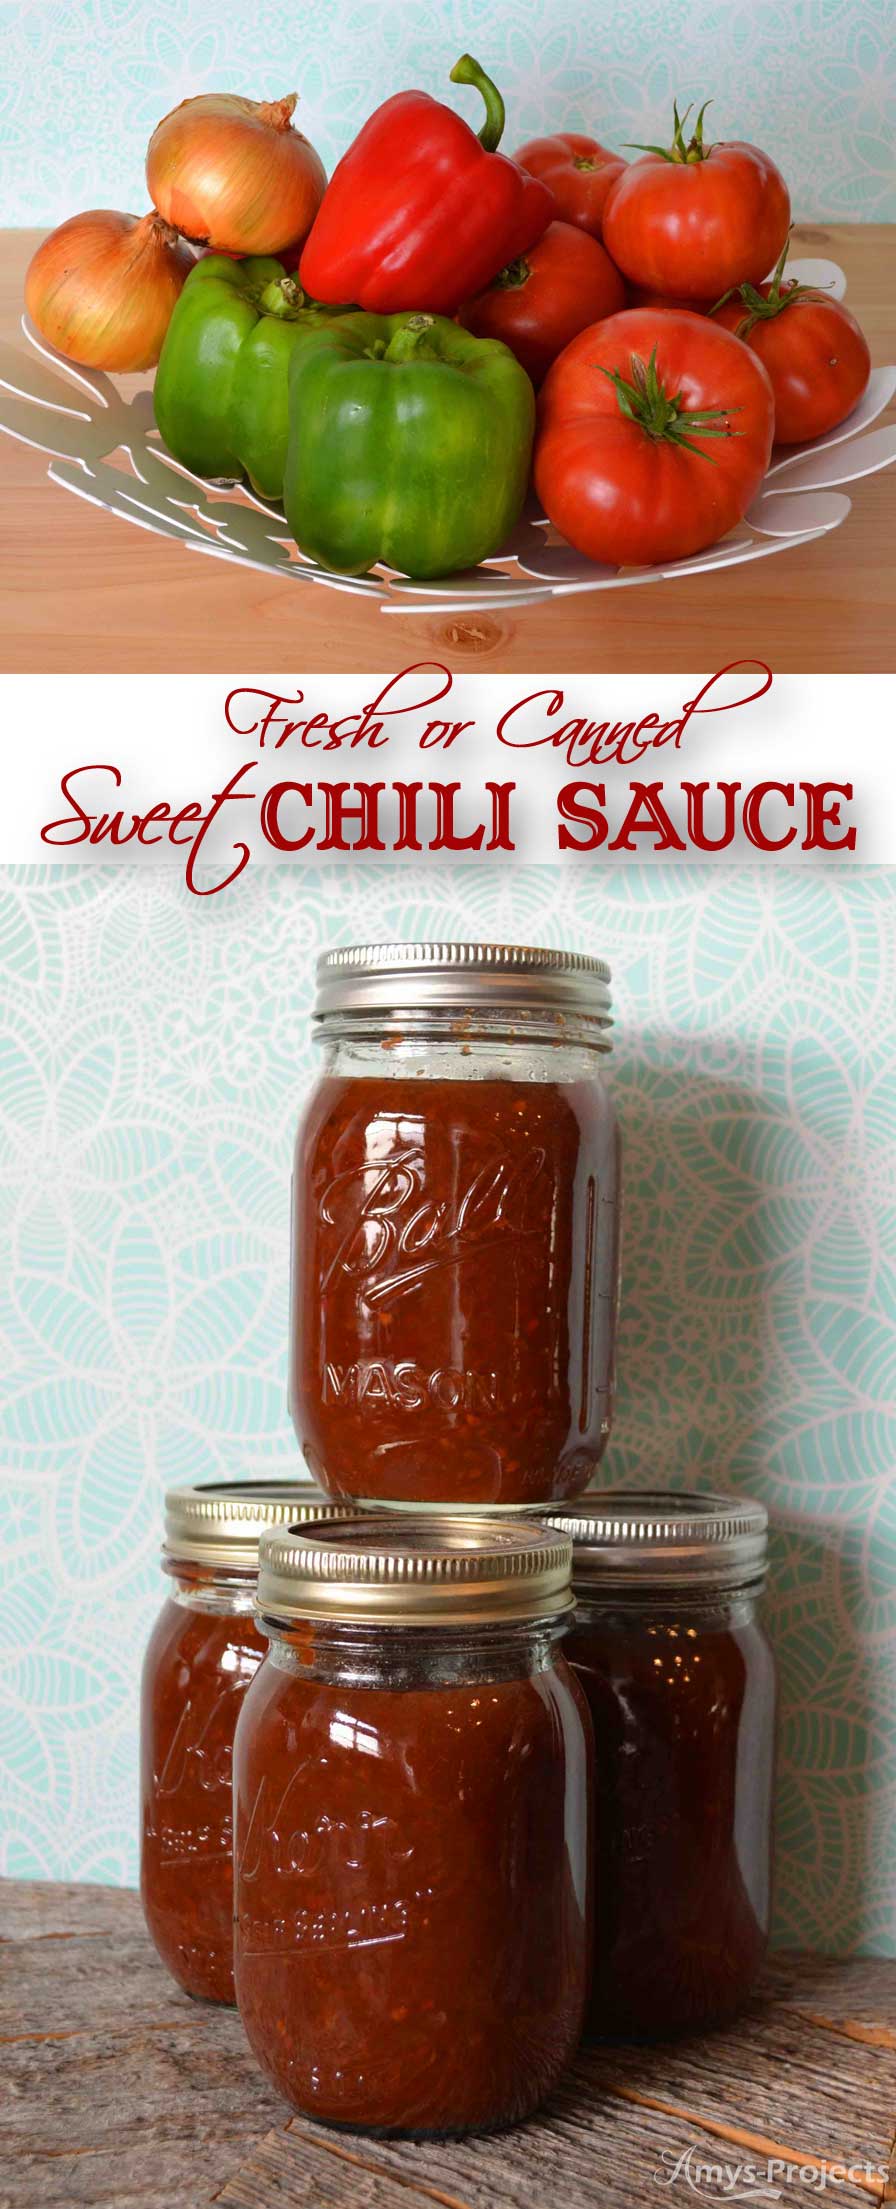 Sweet Chili Sauce Recipe - Amy's Projects